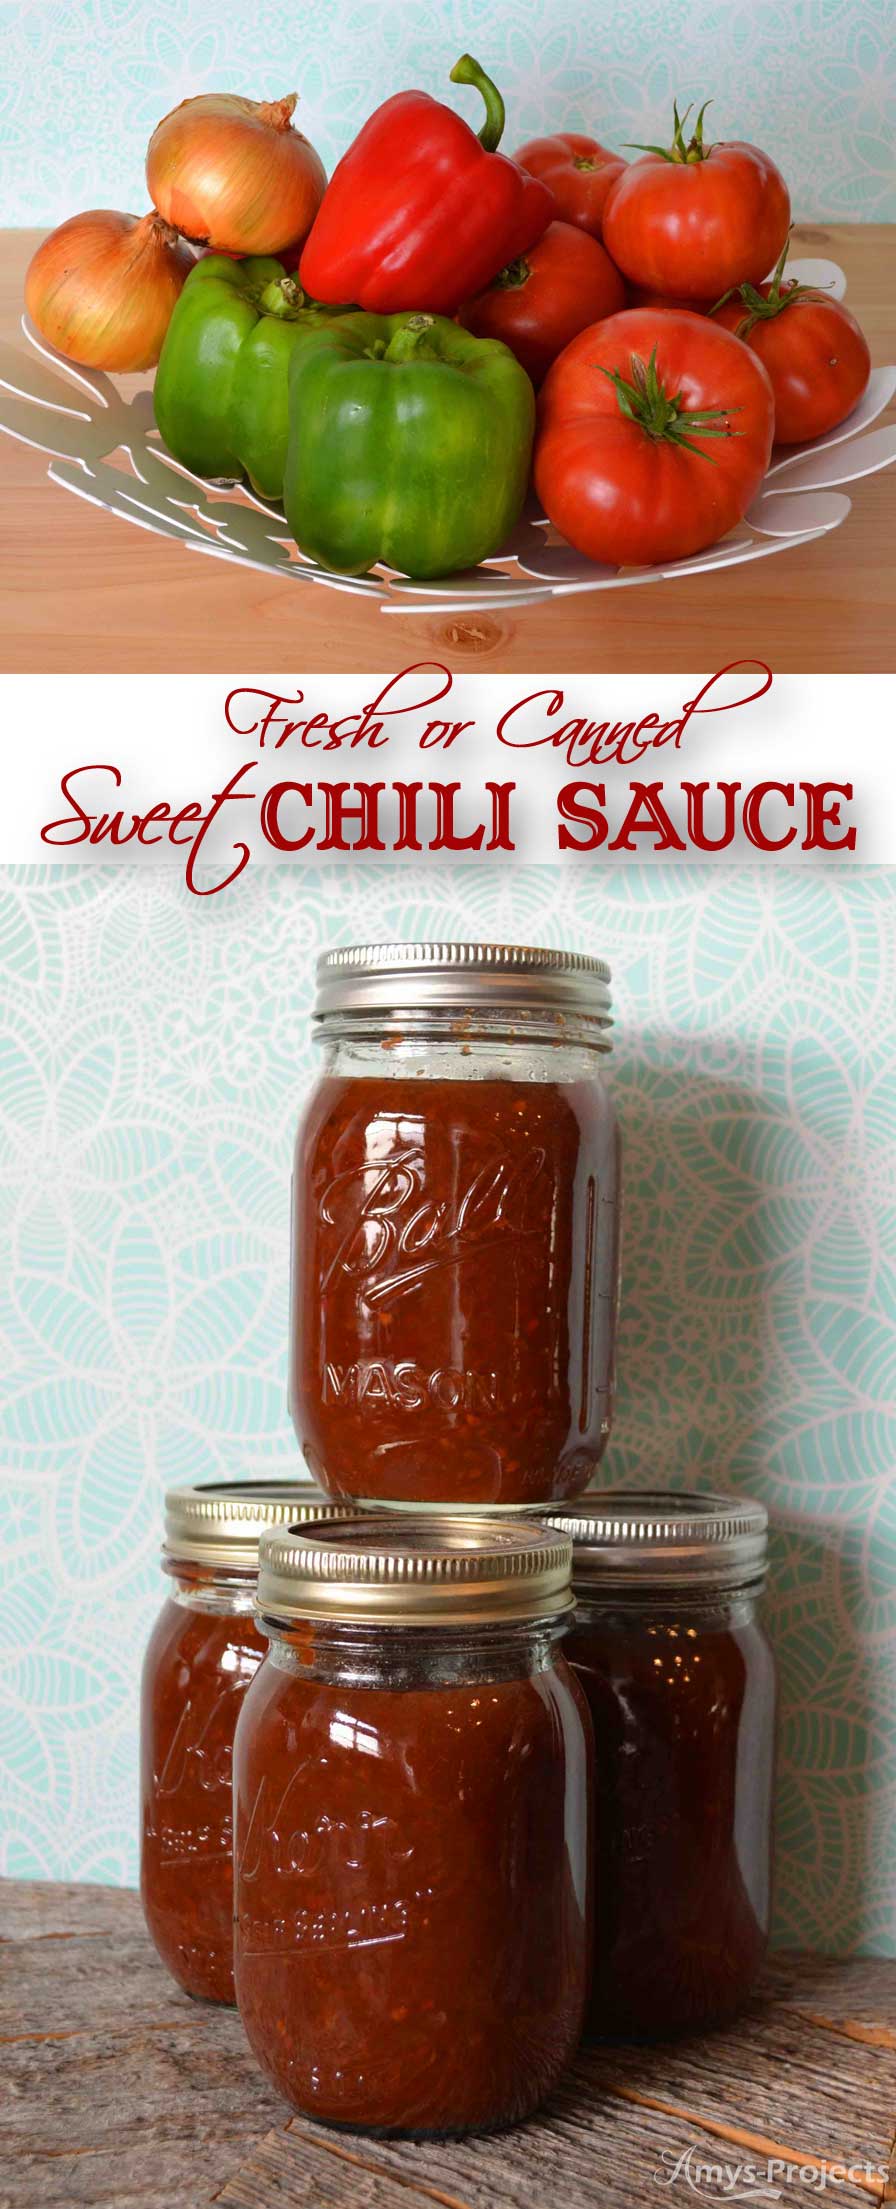 Sweet Chili Sauce Recipe - Amy's Projects